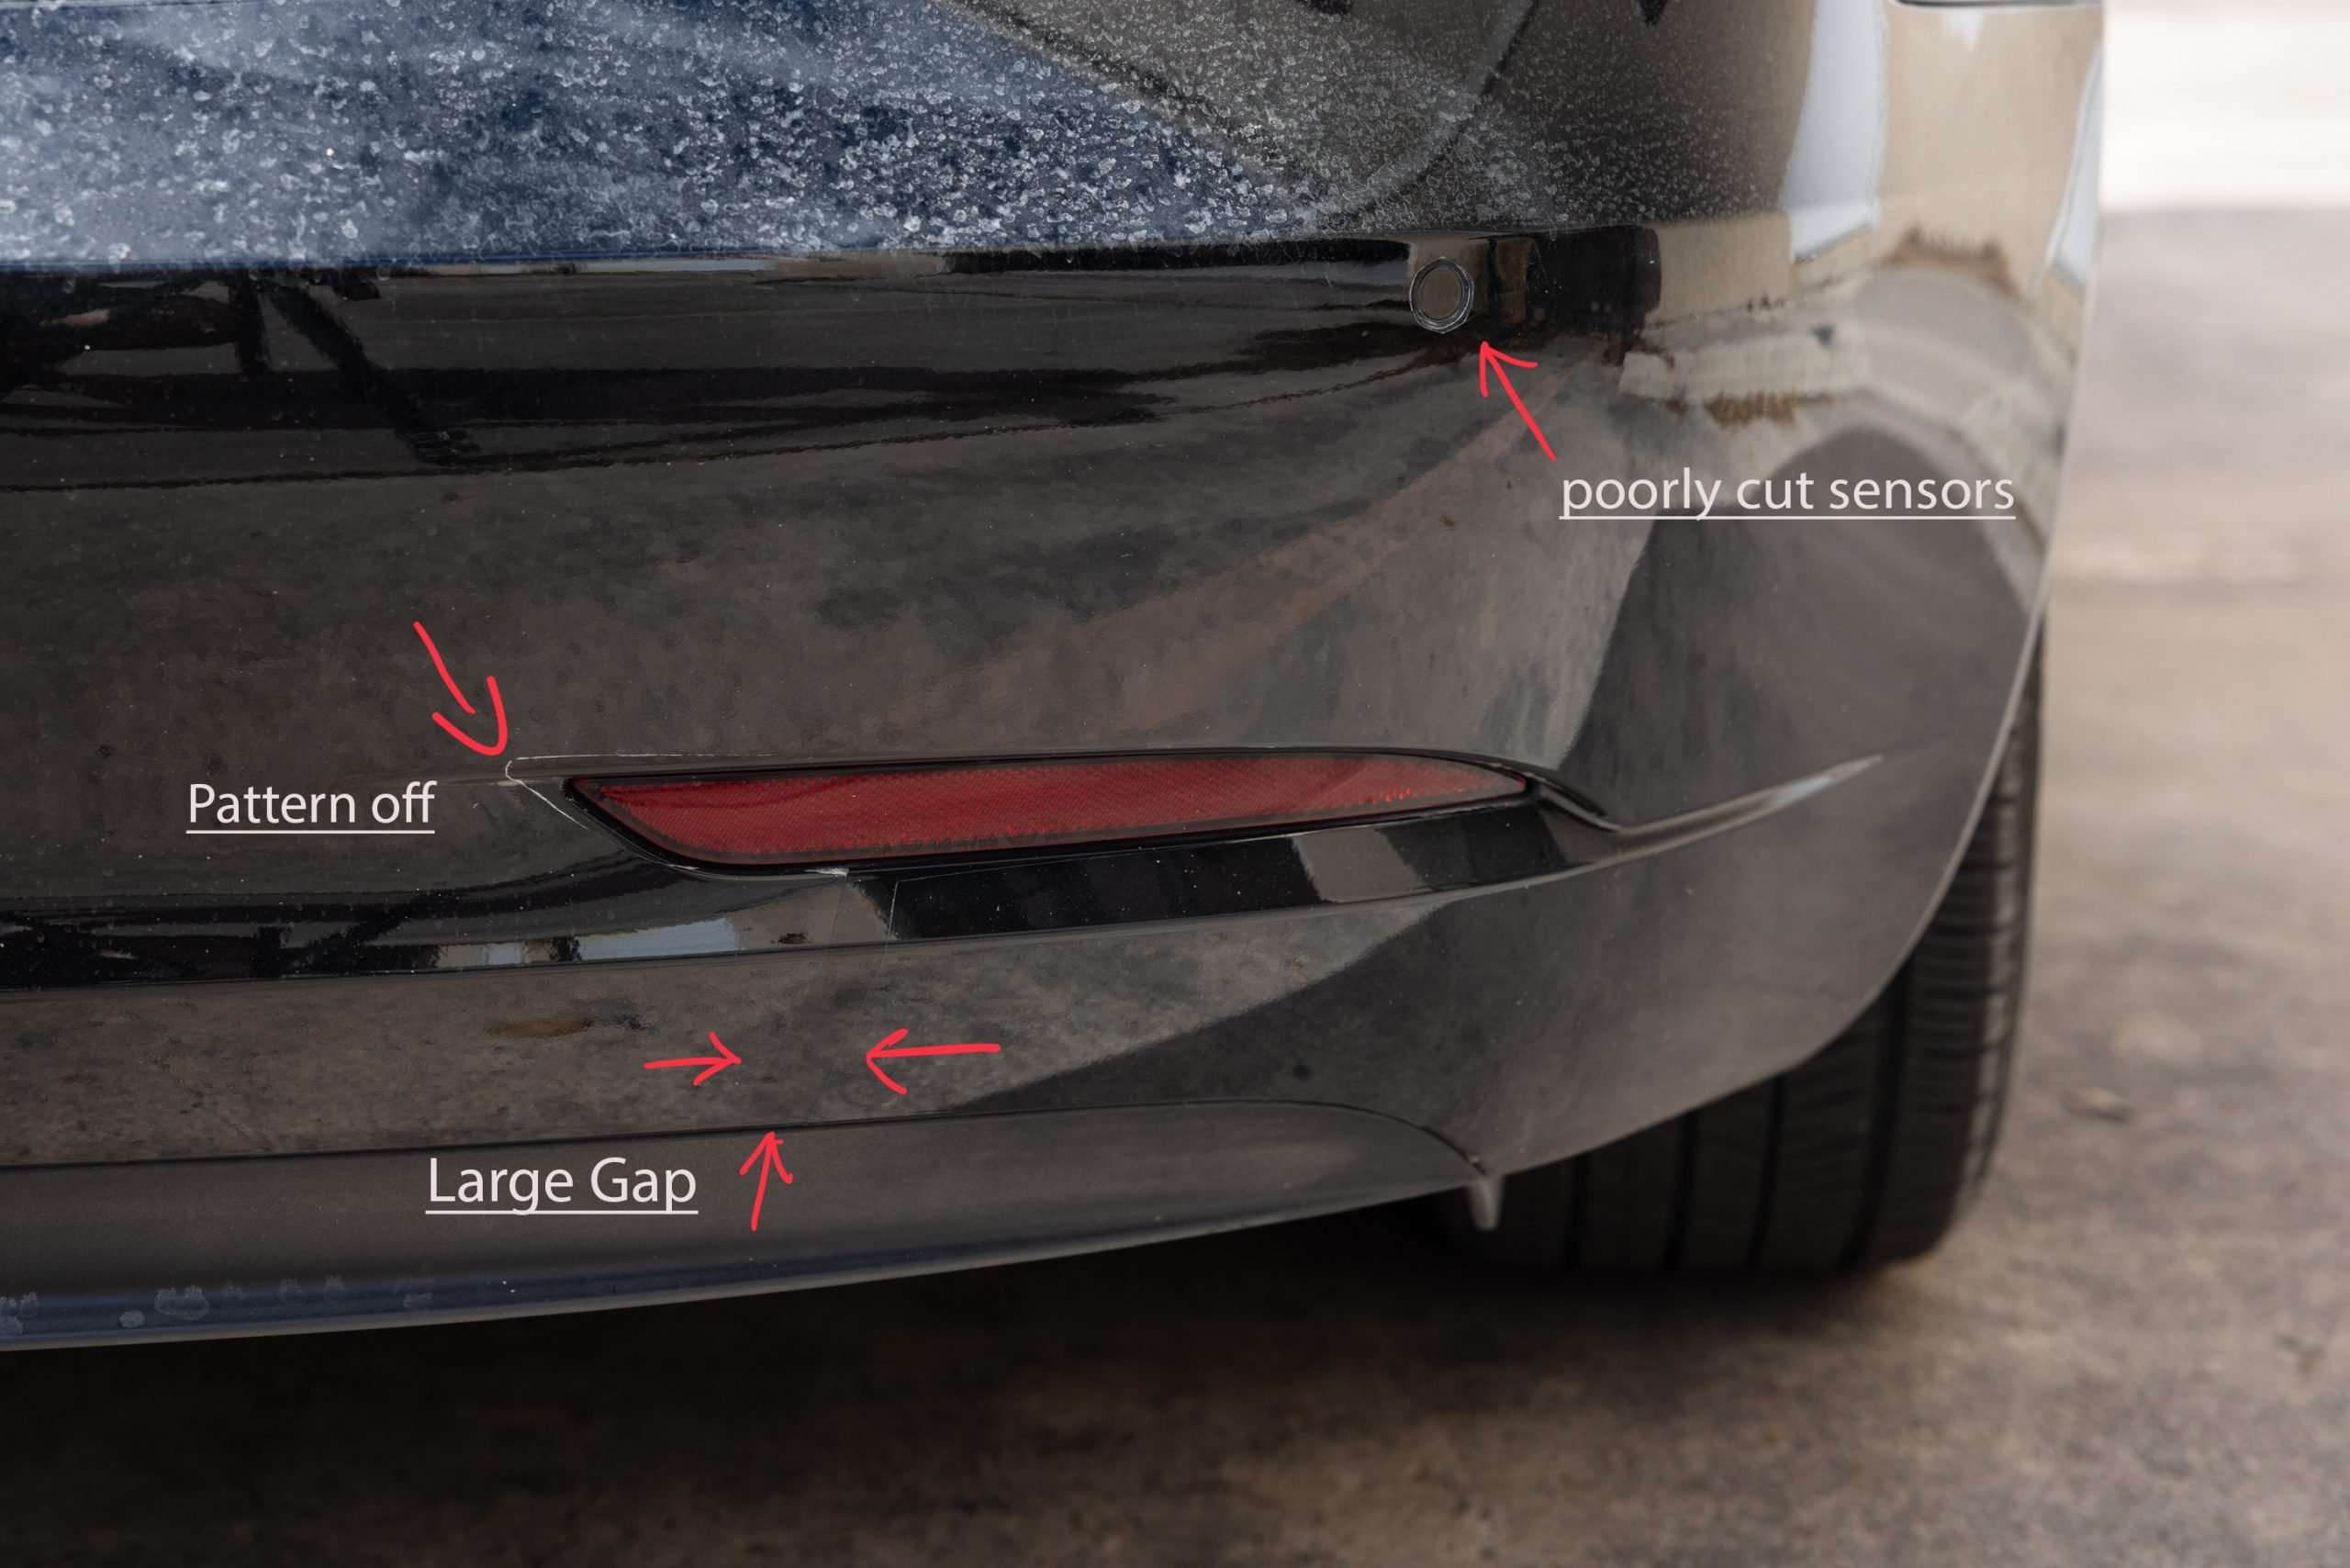 Tesla Paint Protection Film Swapped From Booo to Wooo! - Paint Protection Film in San Antonio, Texas - 6